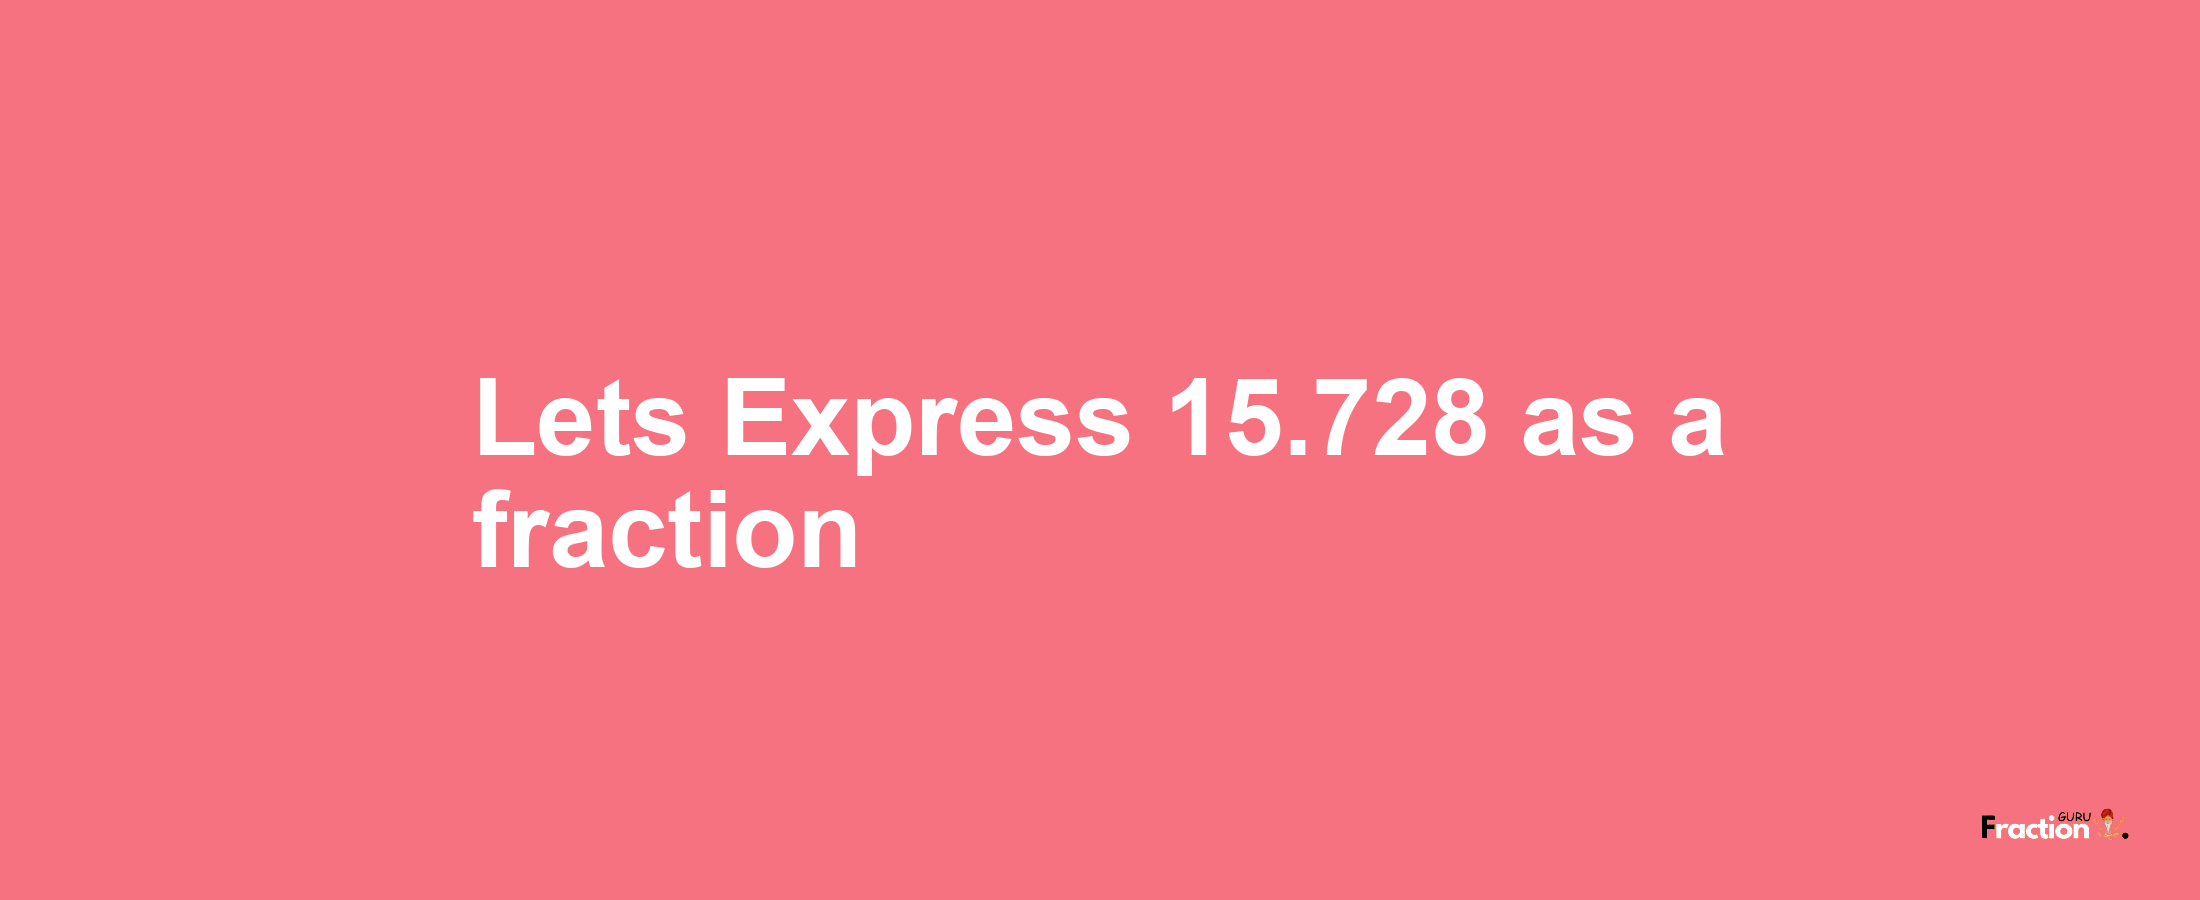 Lets Express 15.728 as afraction